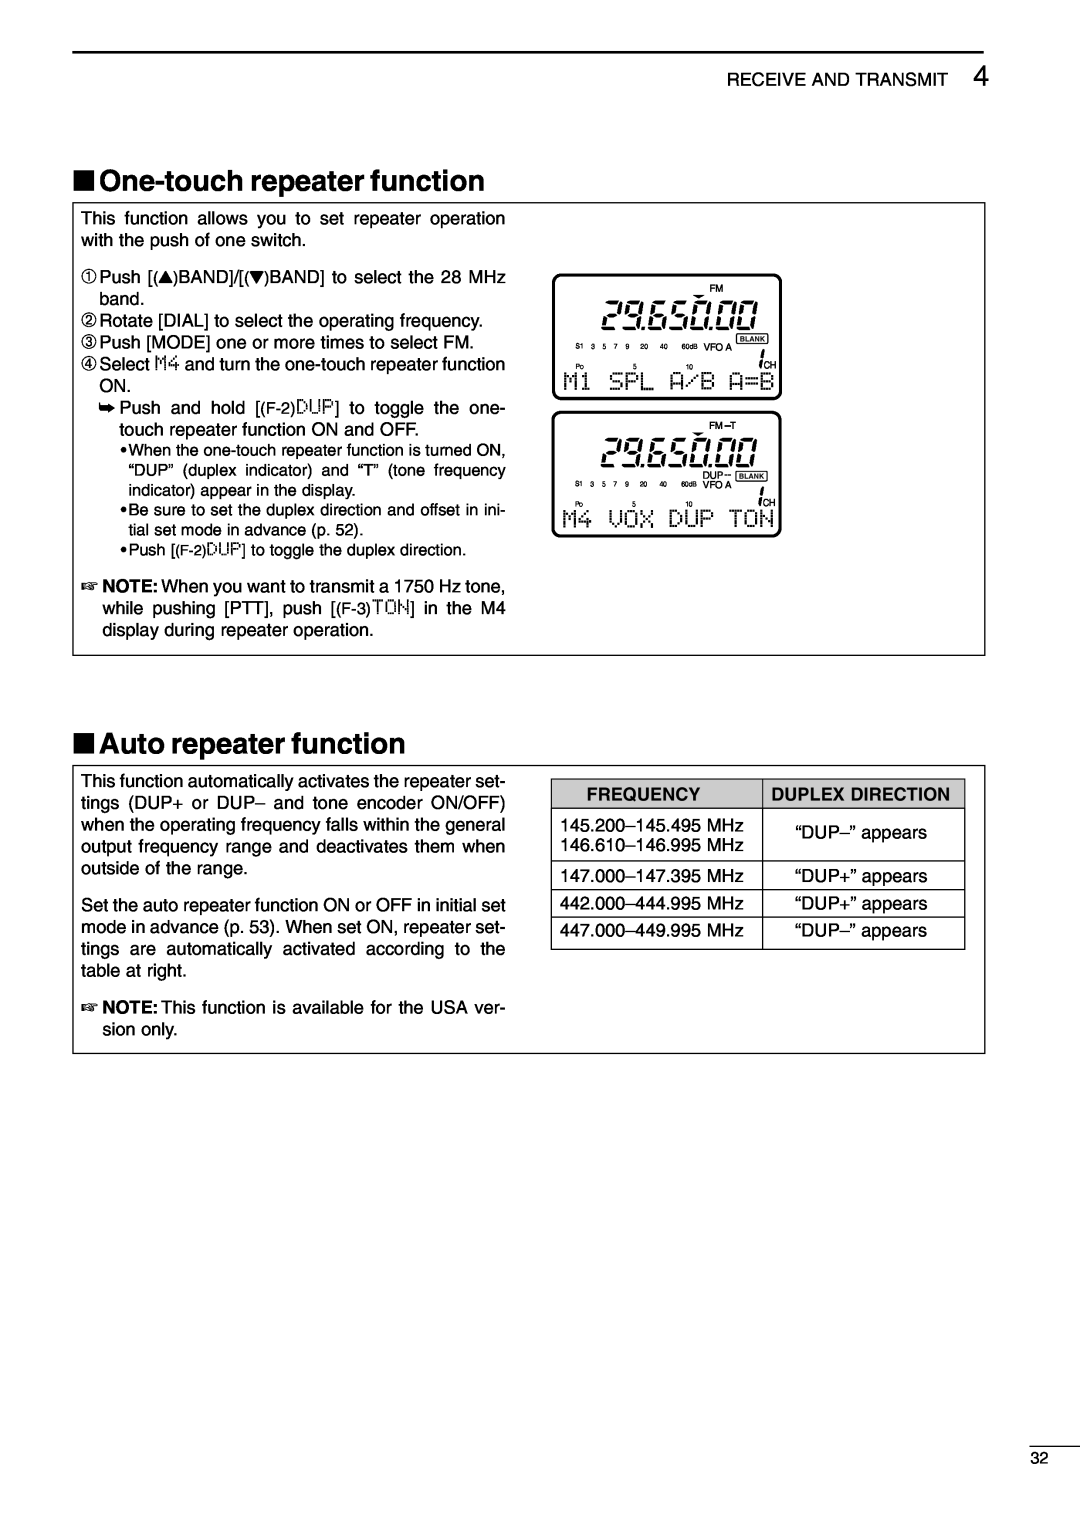 Icom I706MKTMG One-touchrepeater function, Auto repeater function, M1 SPL A/B A=B, Frequency, Duplex Direction 